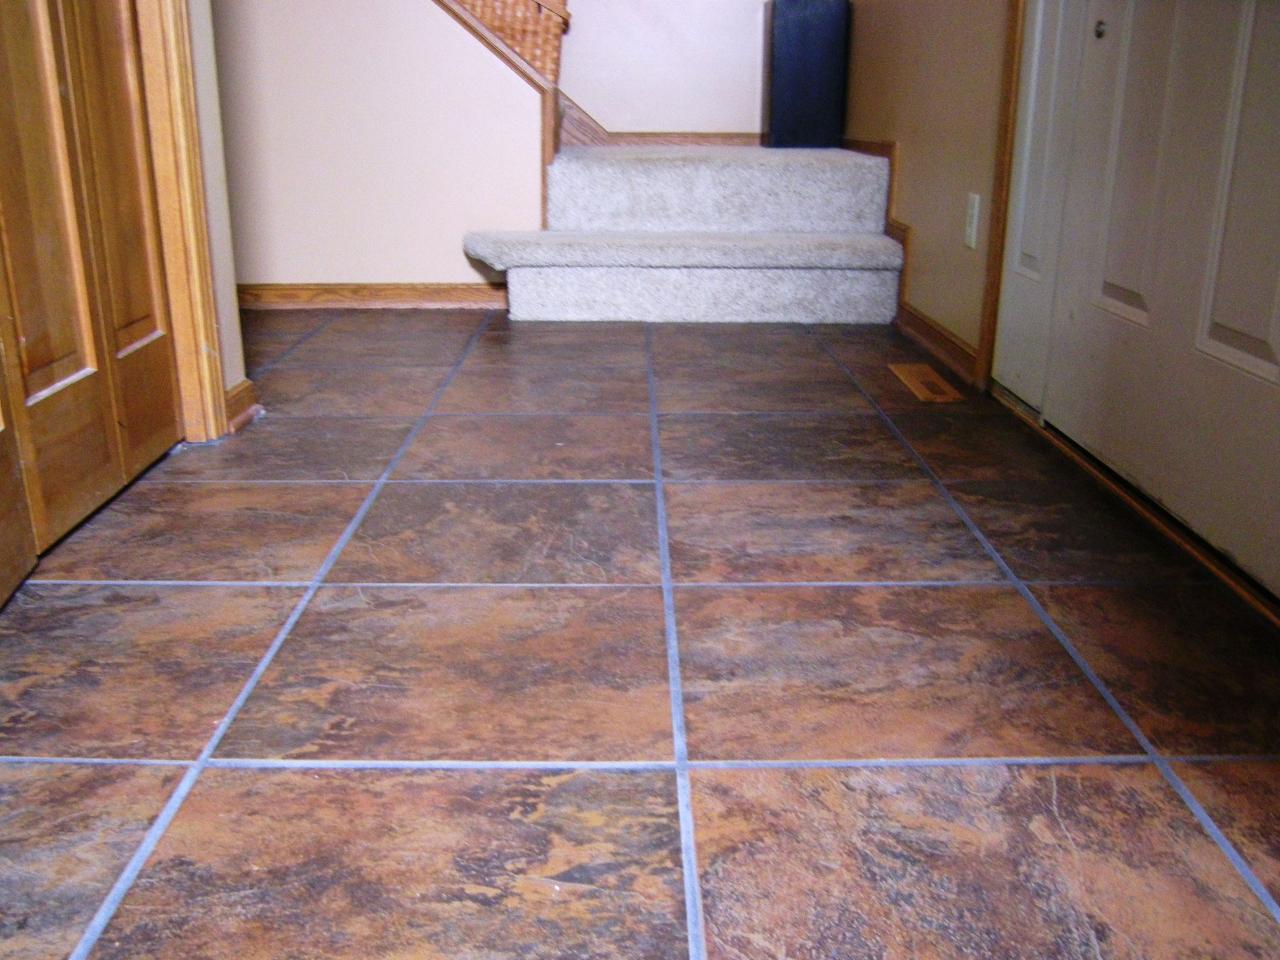 Laying A New Tile Floor How Tos Diy, Kinds Of Tiles For Flooring Pictures